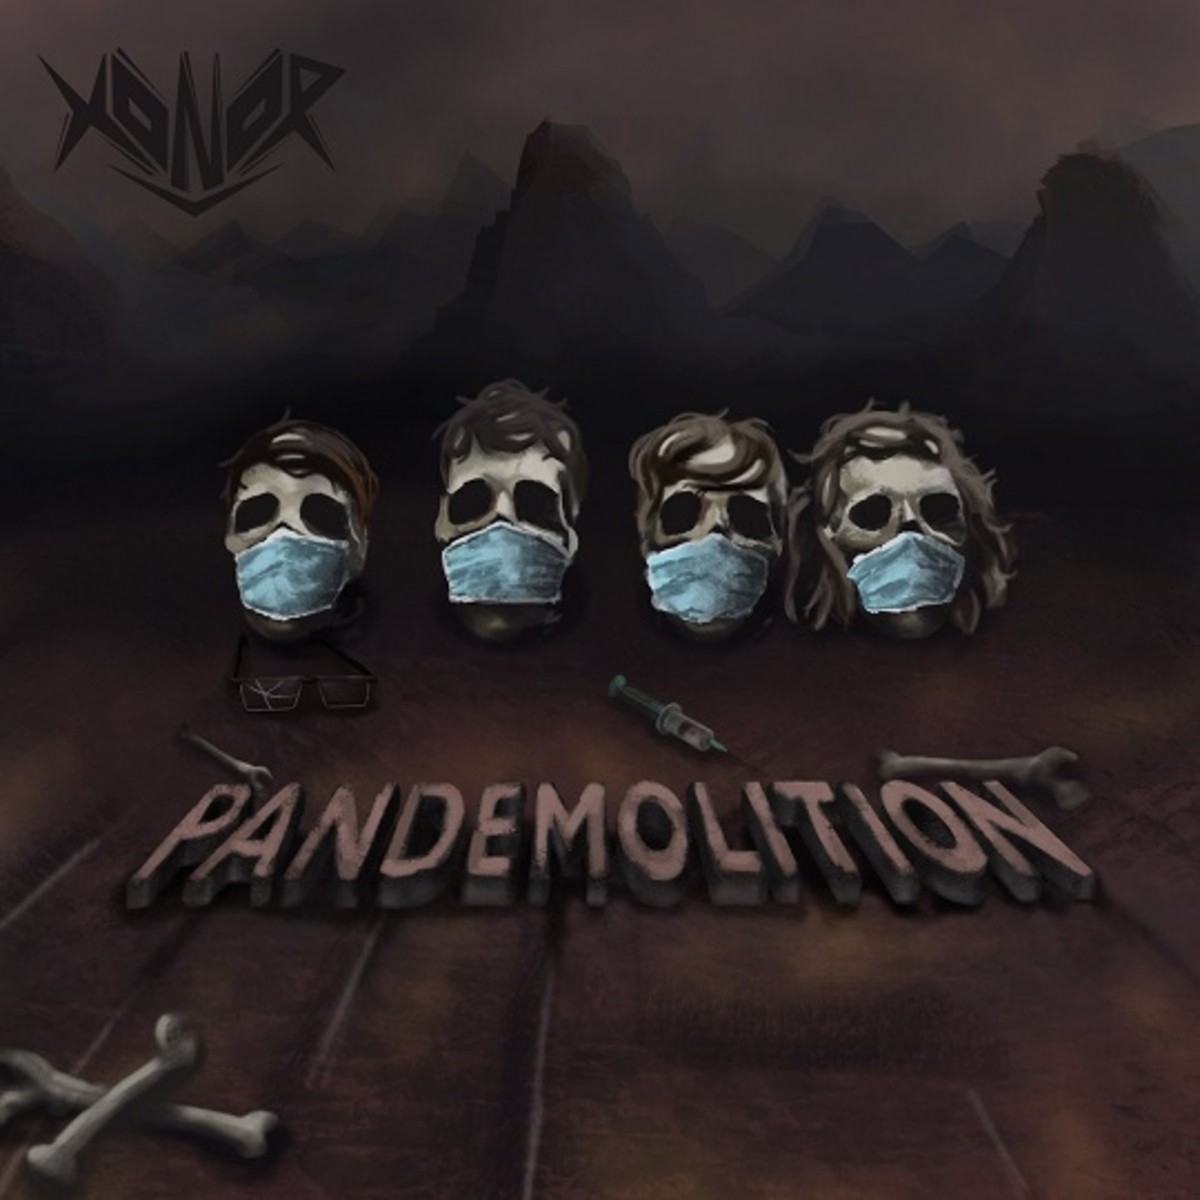 review-of-the-mini-album-pandemolition-by-switzerlands-new-thrash-metal-band-honor